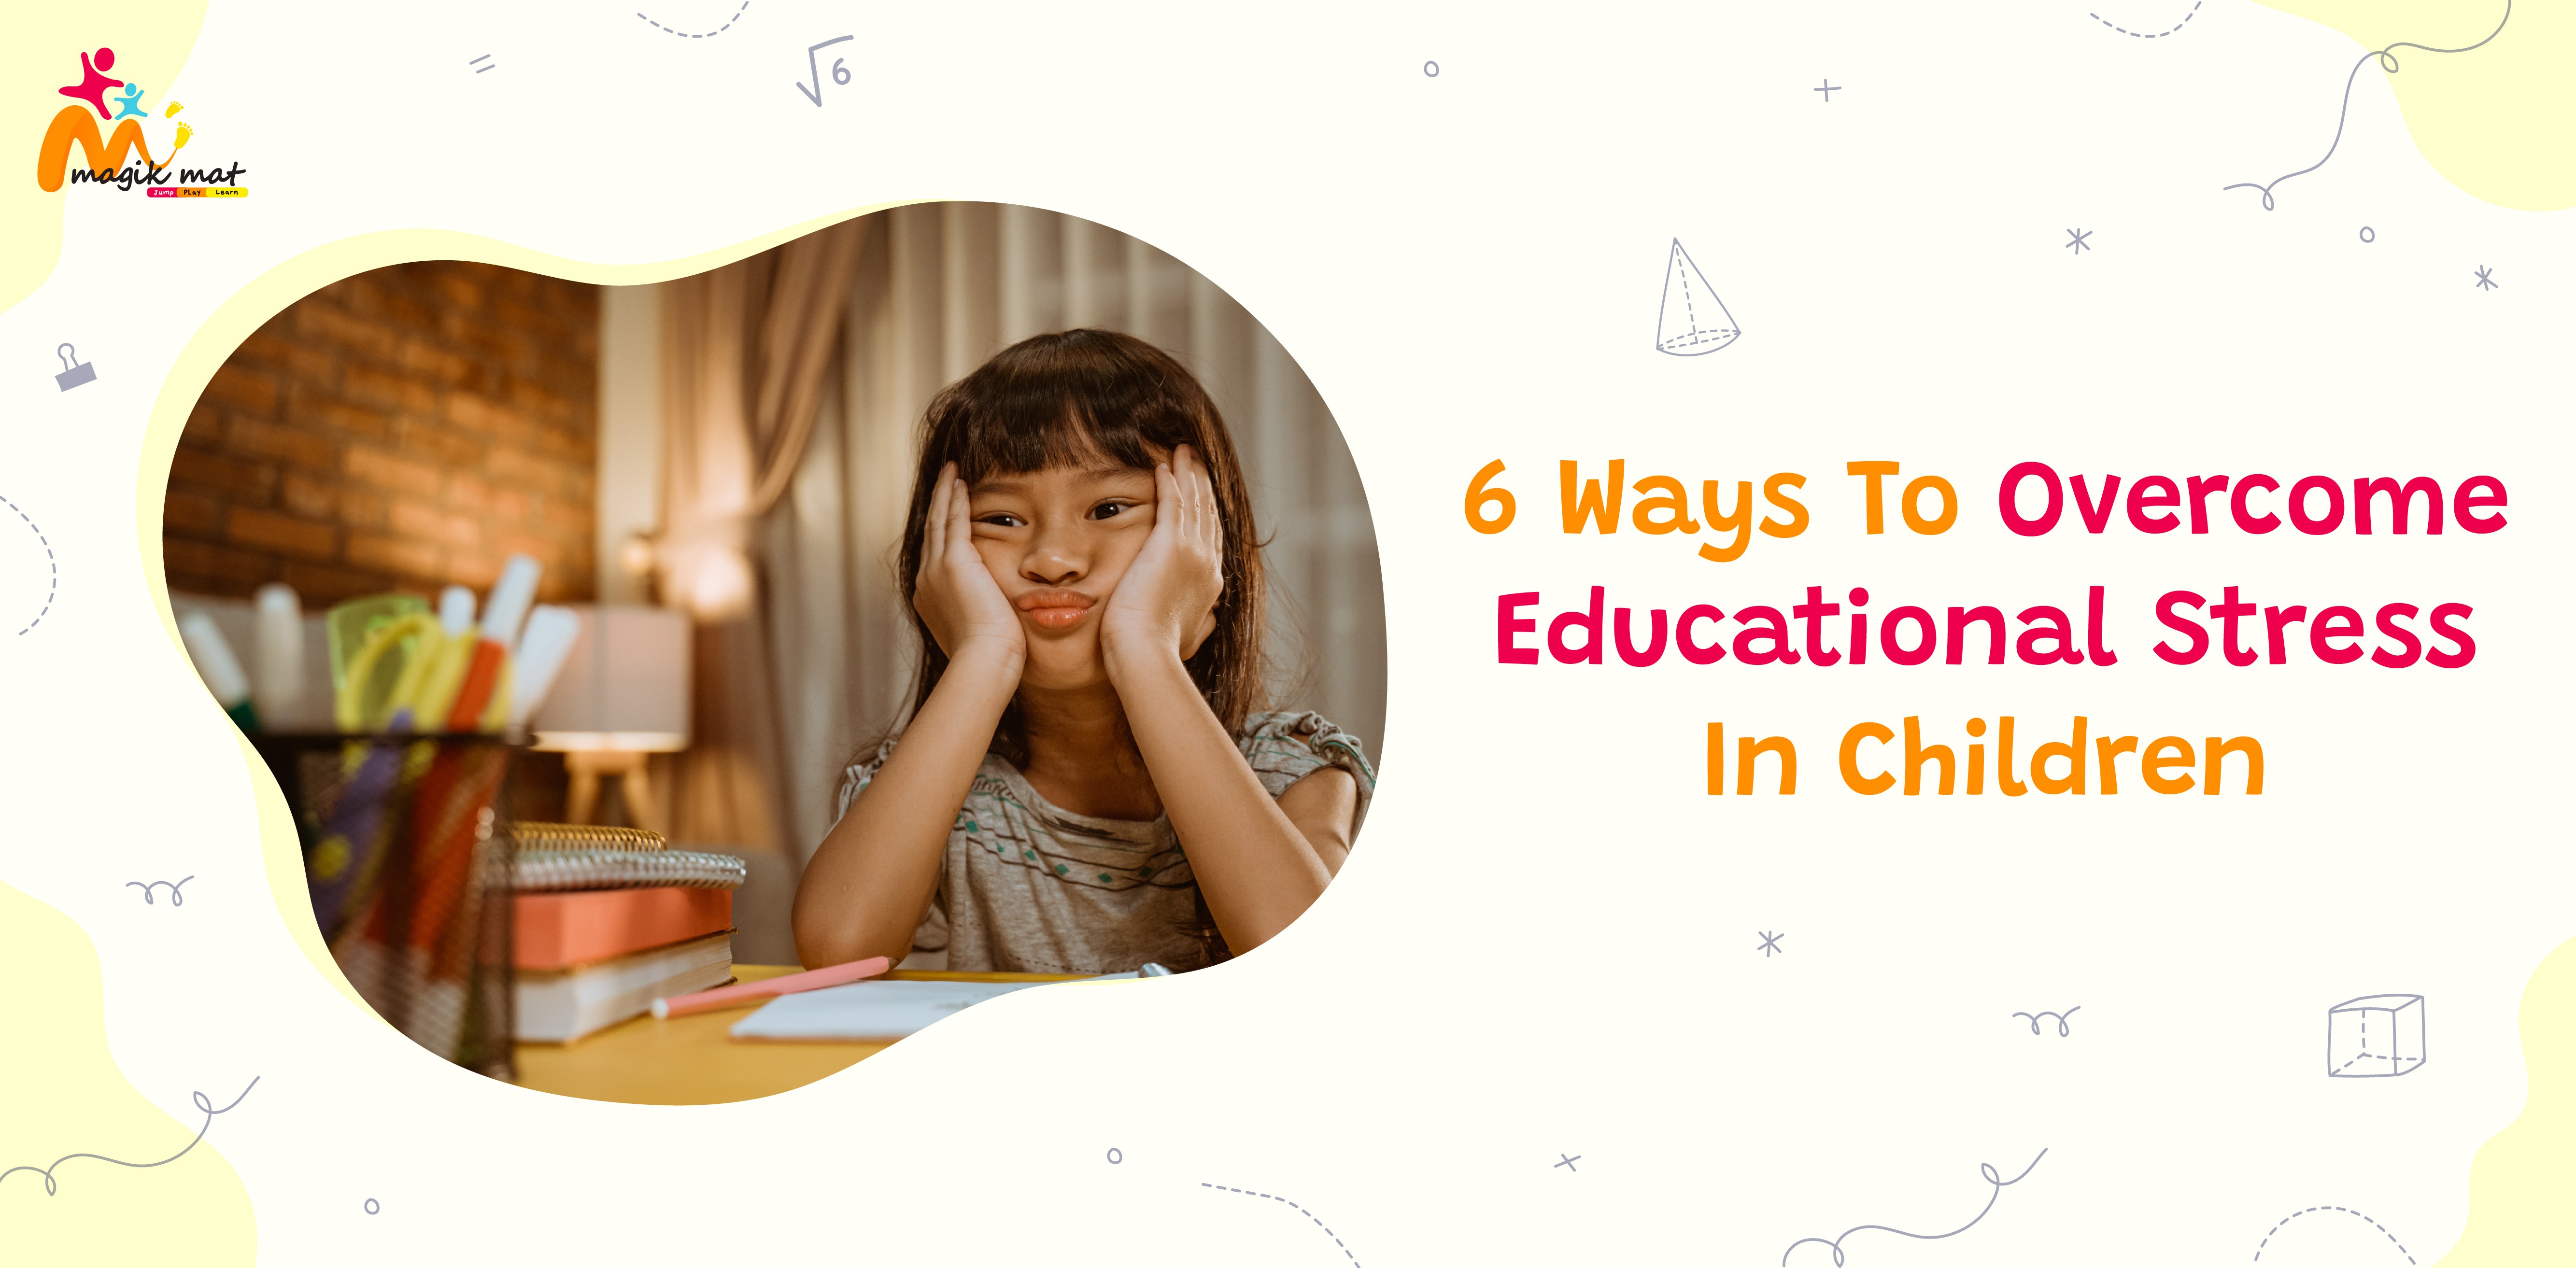 6 Ways to Overcome Educational Stress in Children